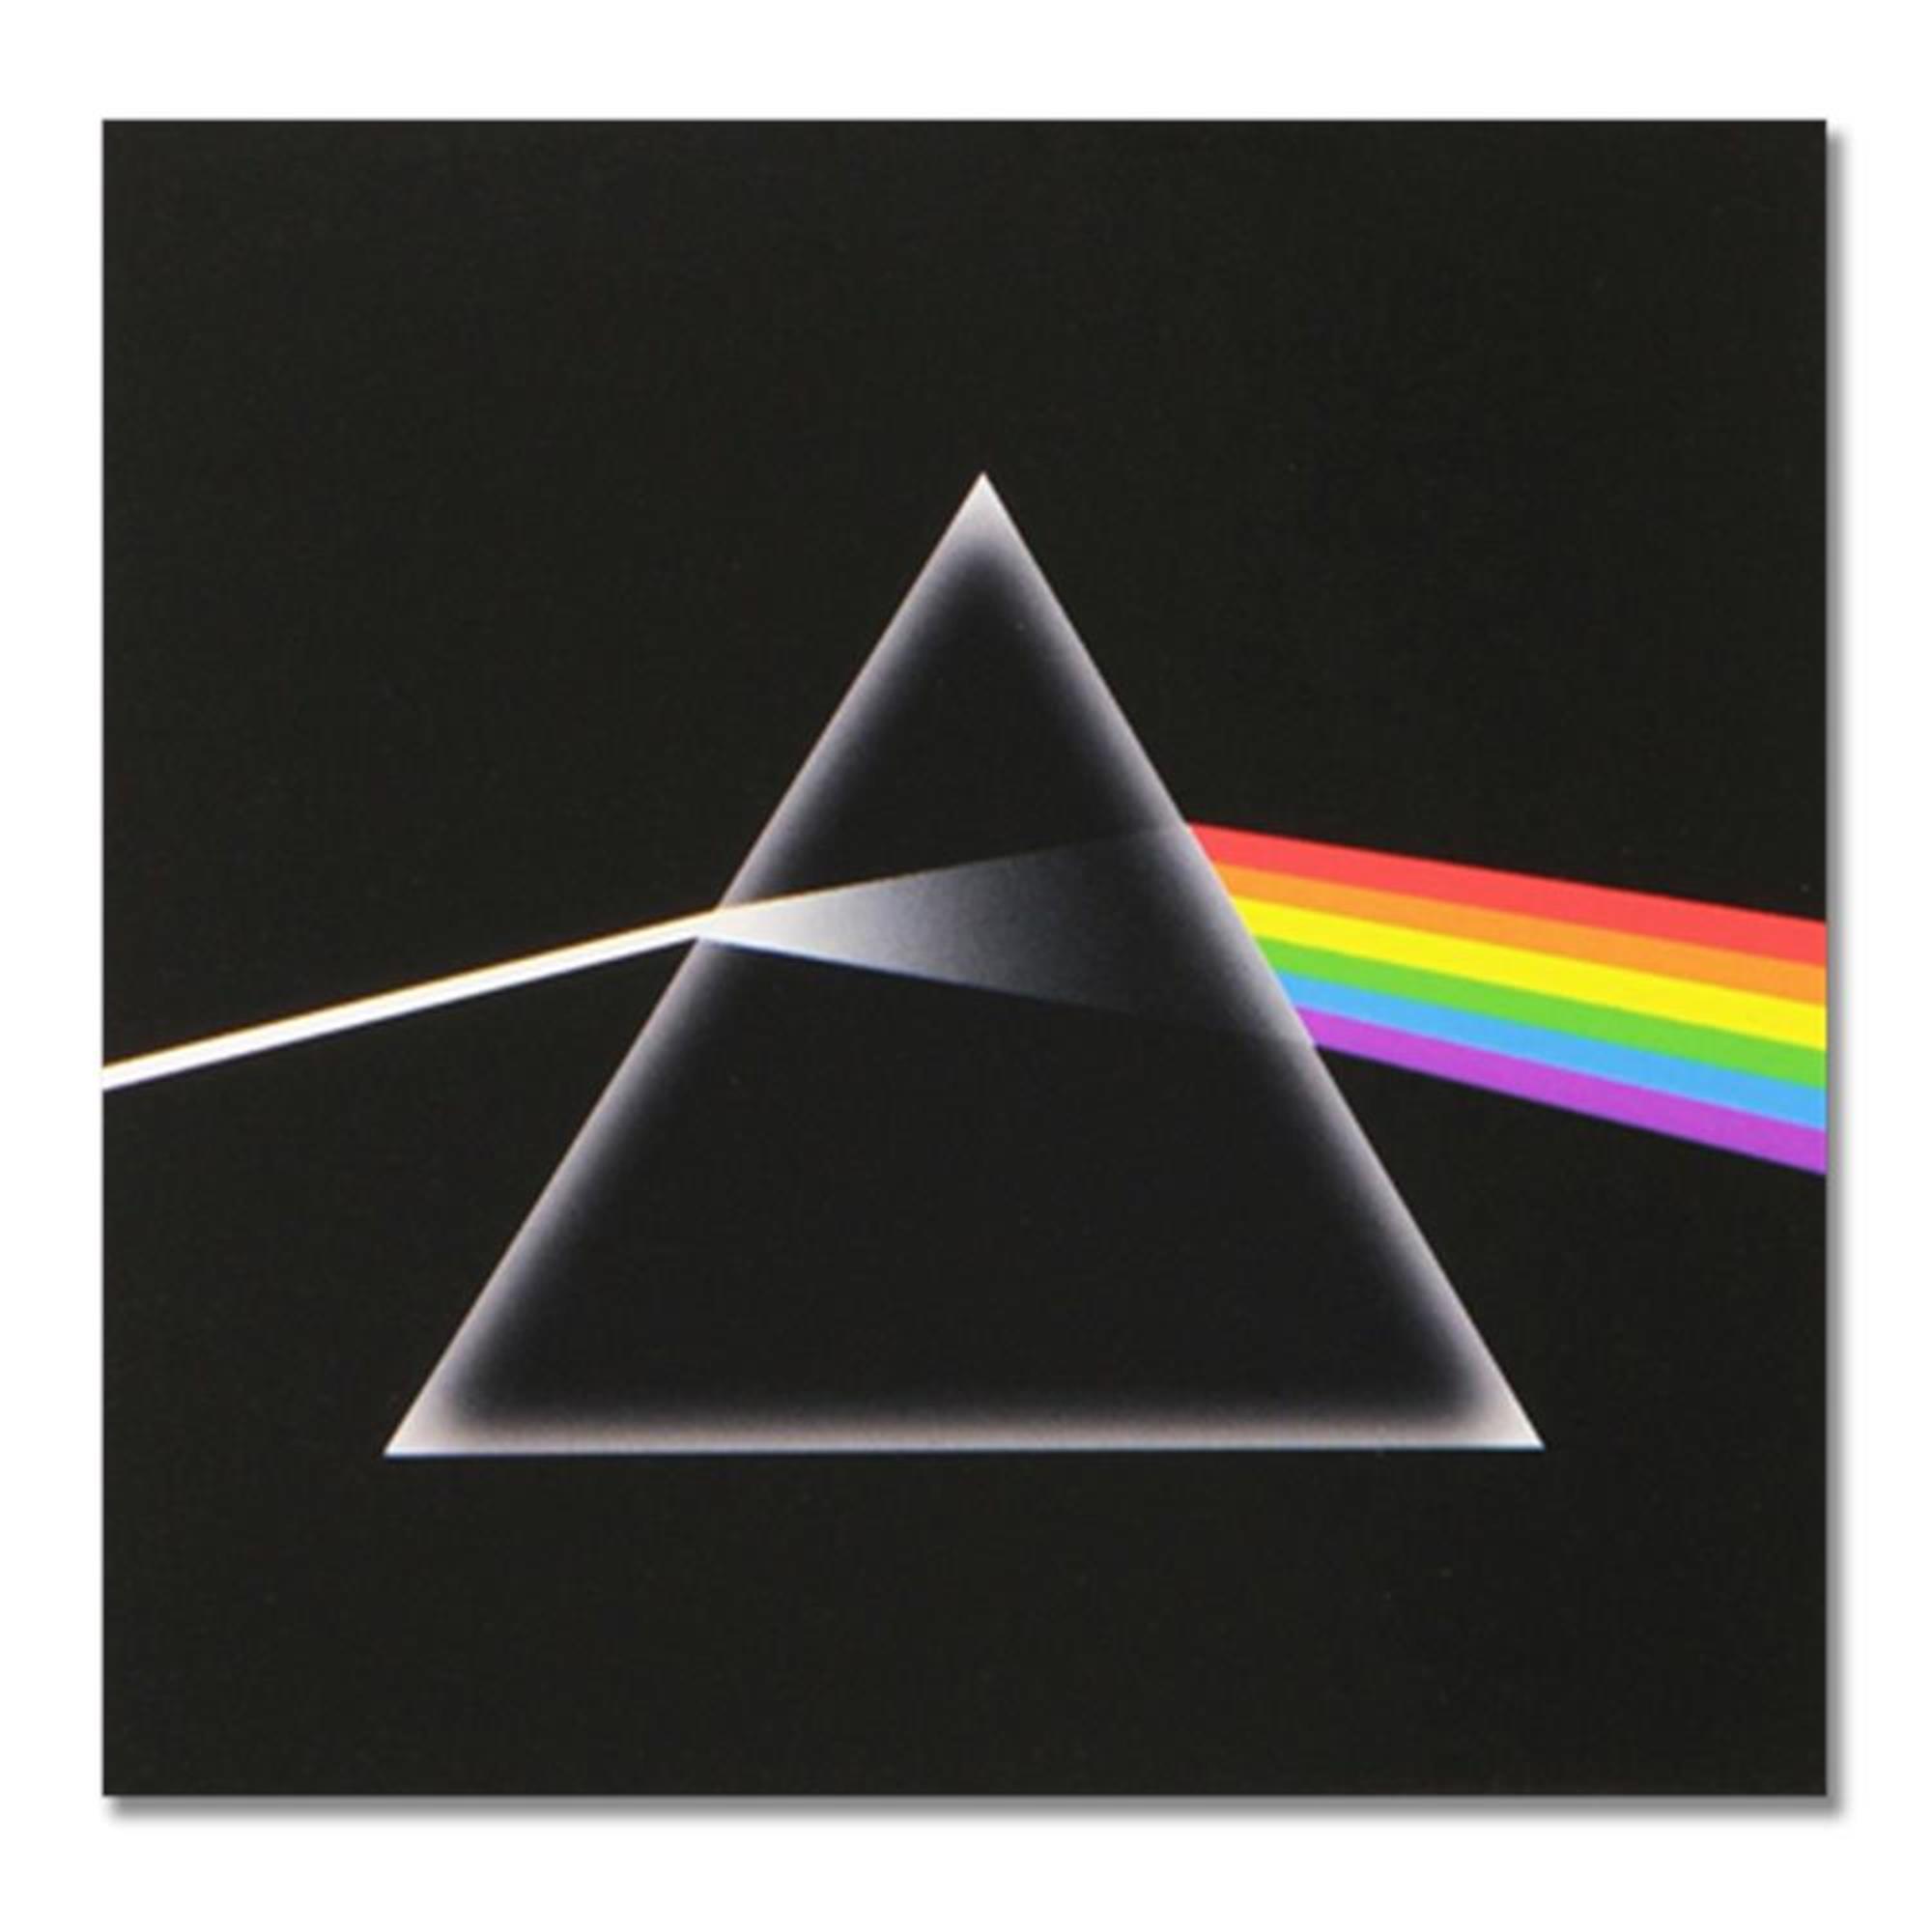 Dark Side Of The Moon Magnet